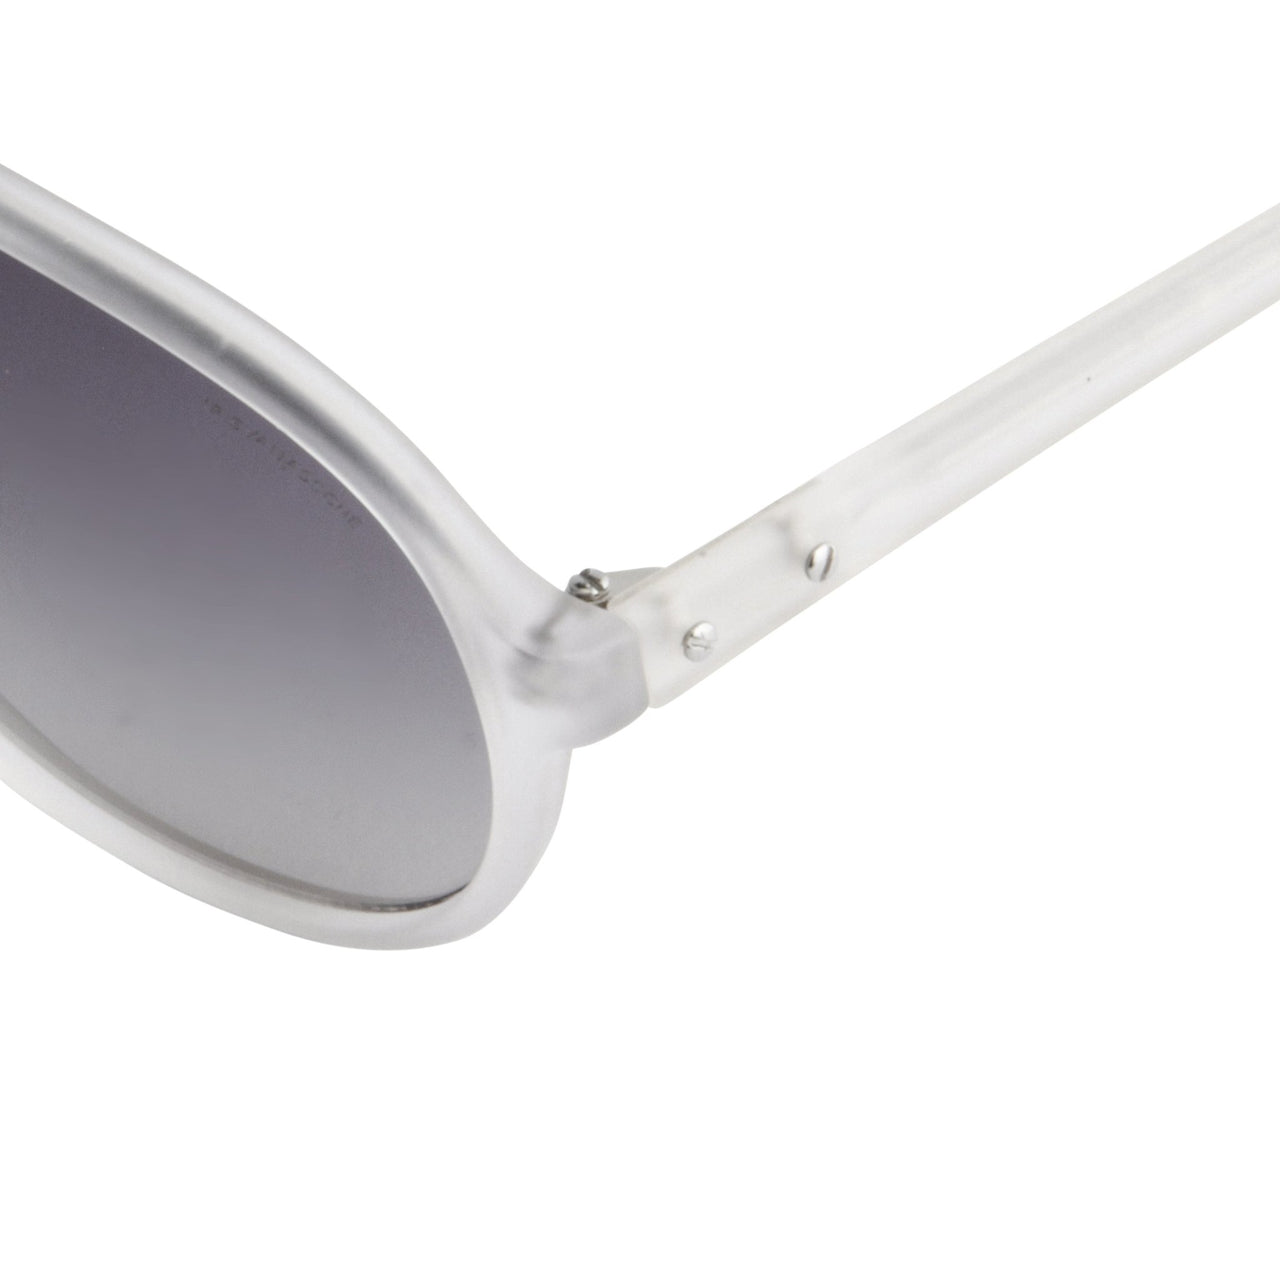 Kris Van Assche Sunglasses Unisex Rubberised Clear with Grey Graduated Lenses Category 2- KVA48C2SUN - Watches & Crystals